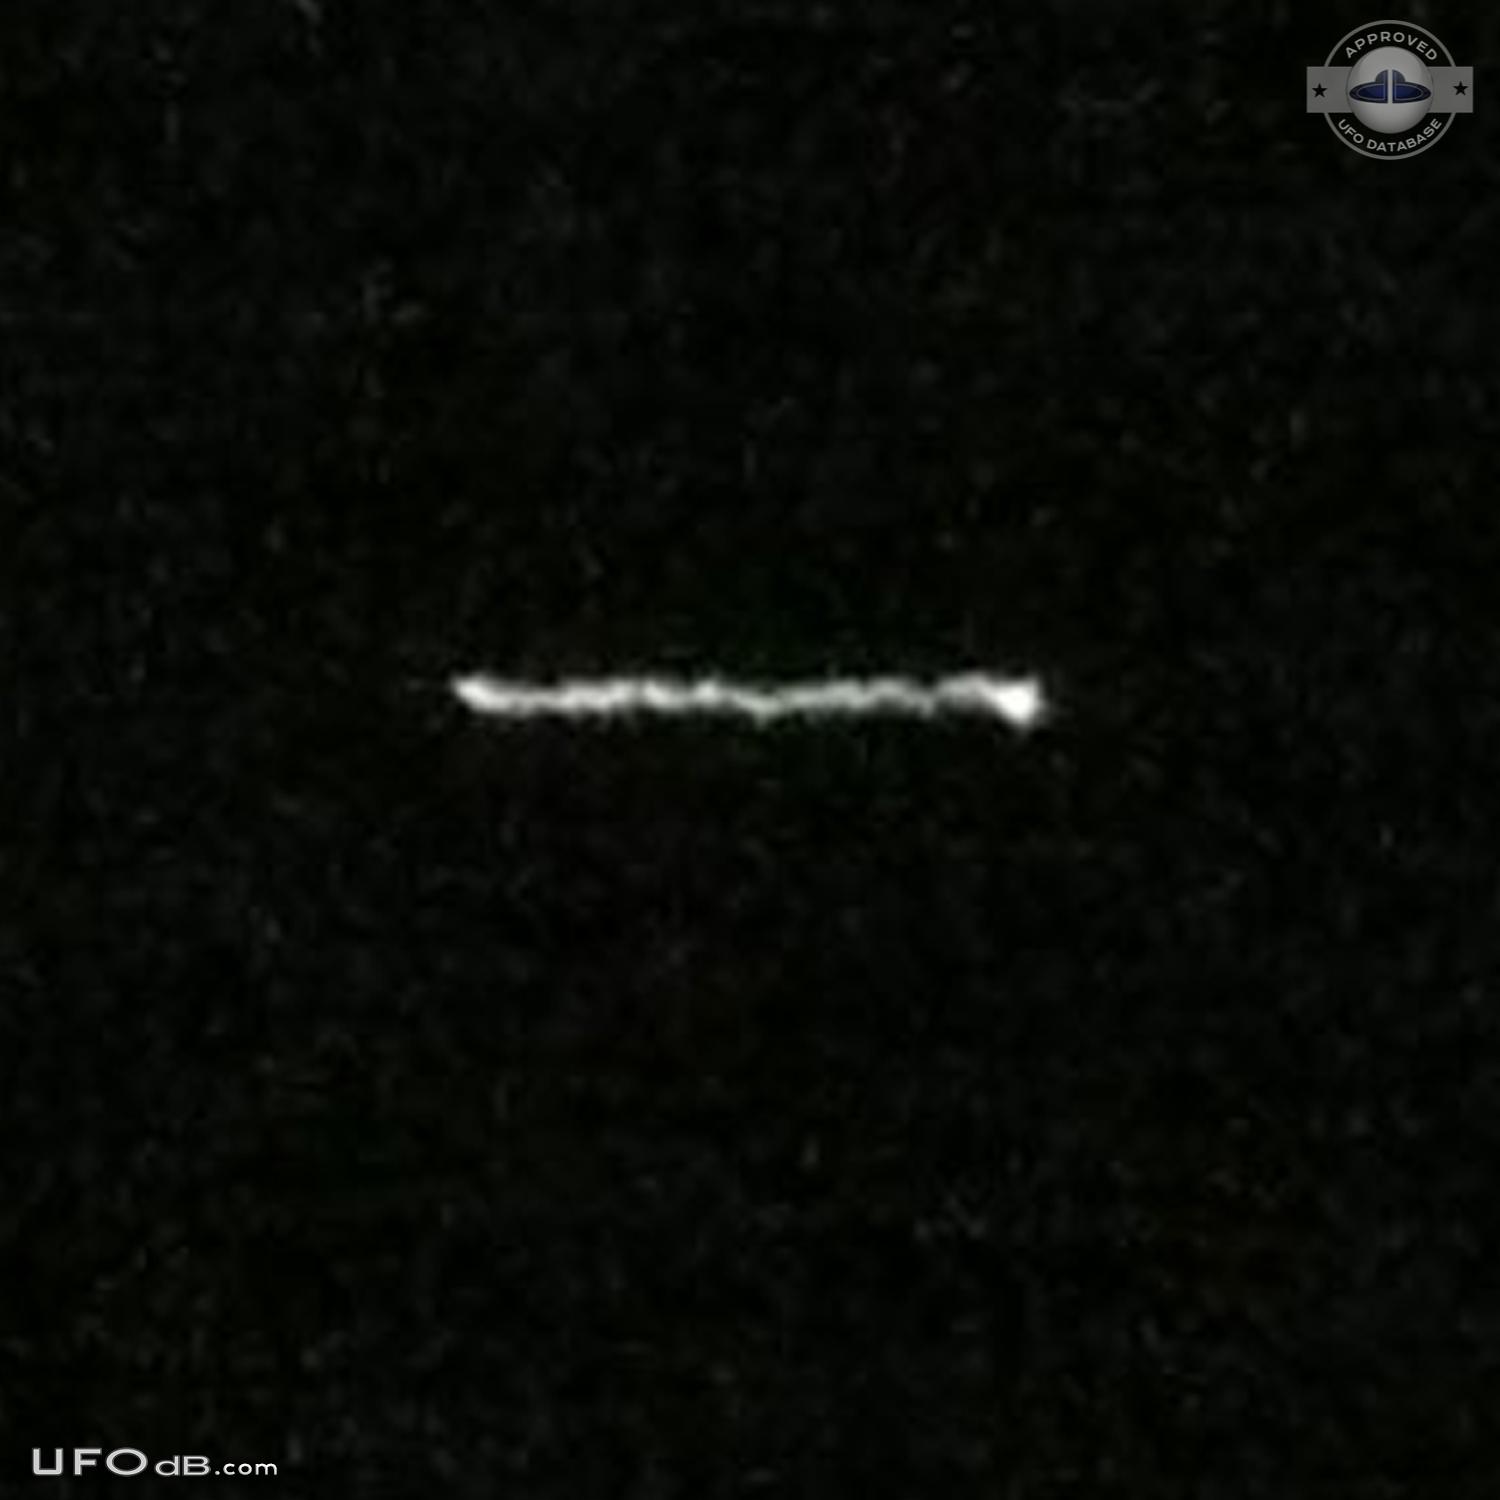 Straight line of white light UFO changing direction over Chichen Itza UFO Picture #635-5